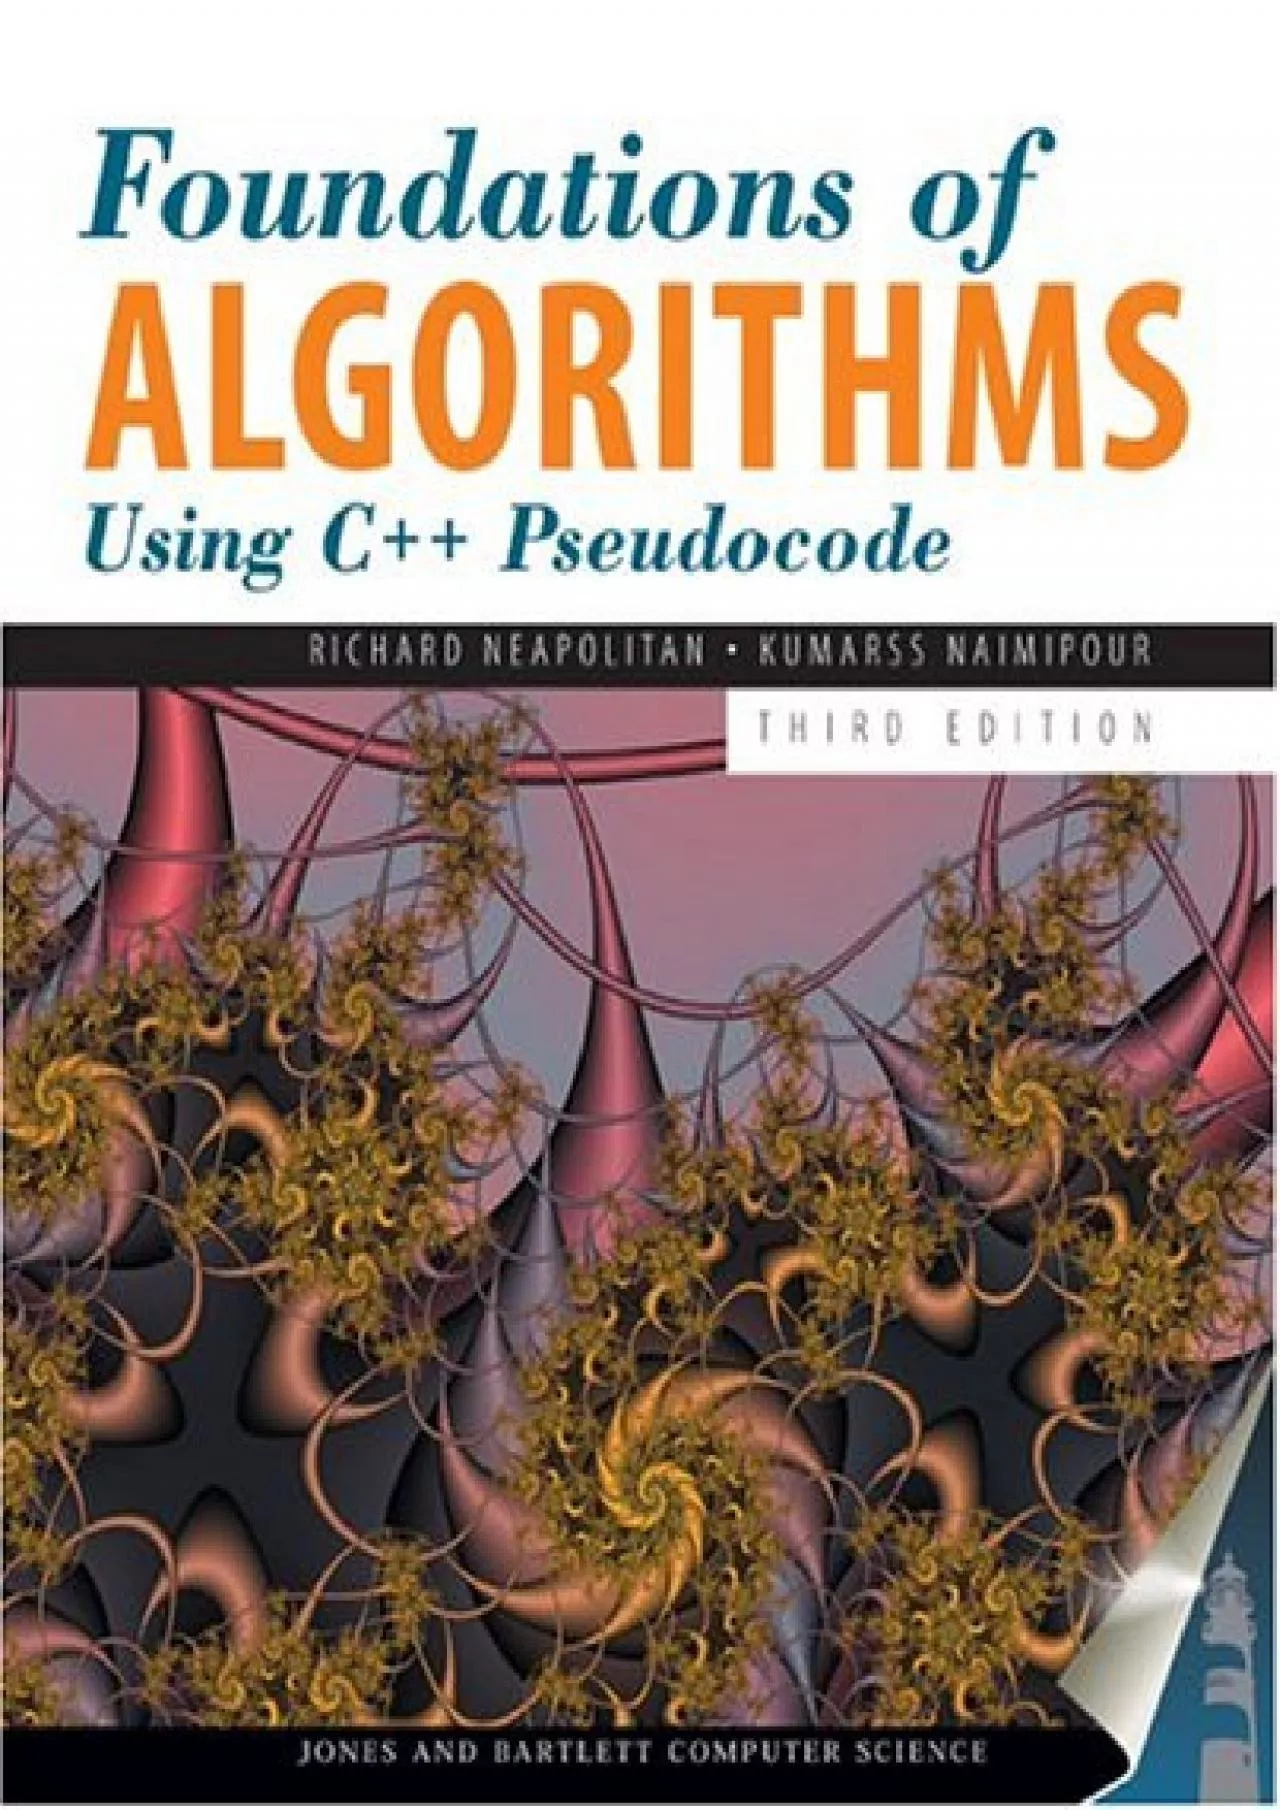 [READING BOOK]-Foundations of Algorithms Using C++ Pseudocode